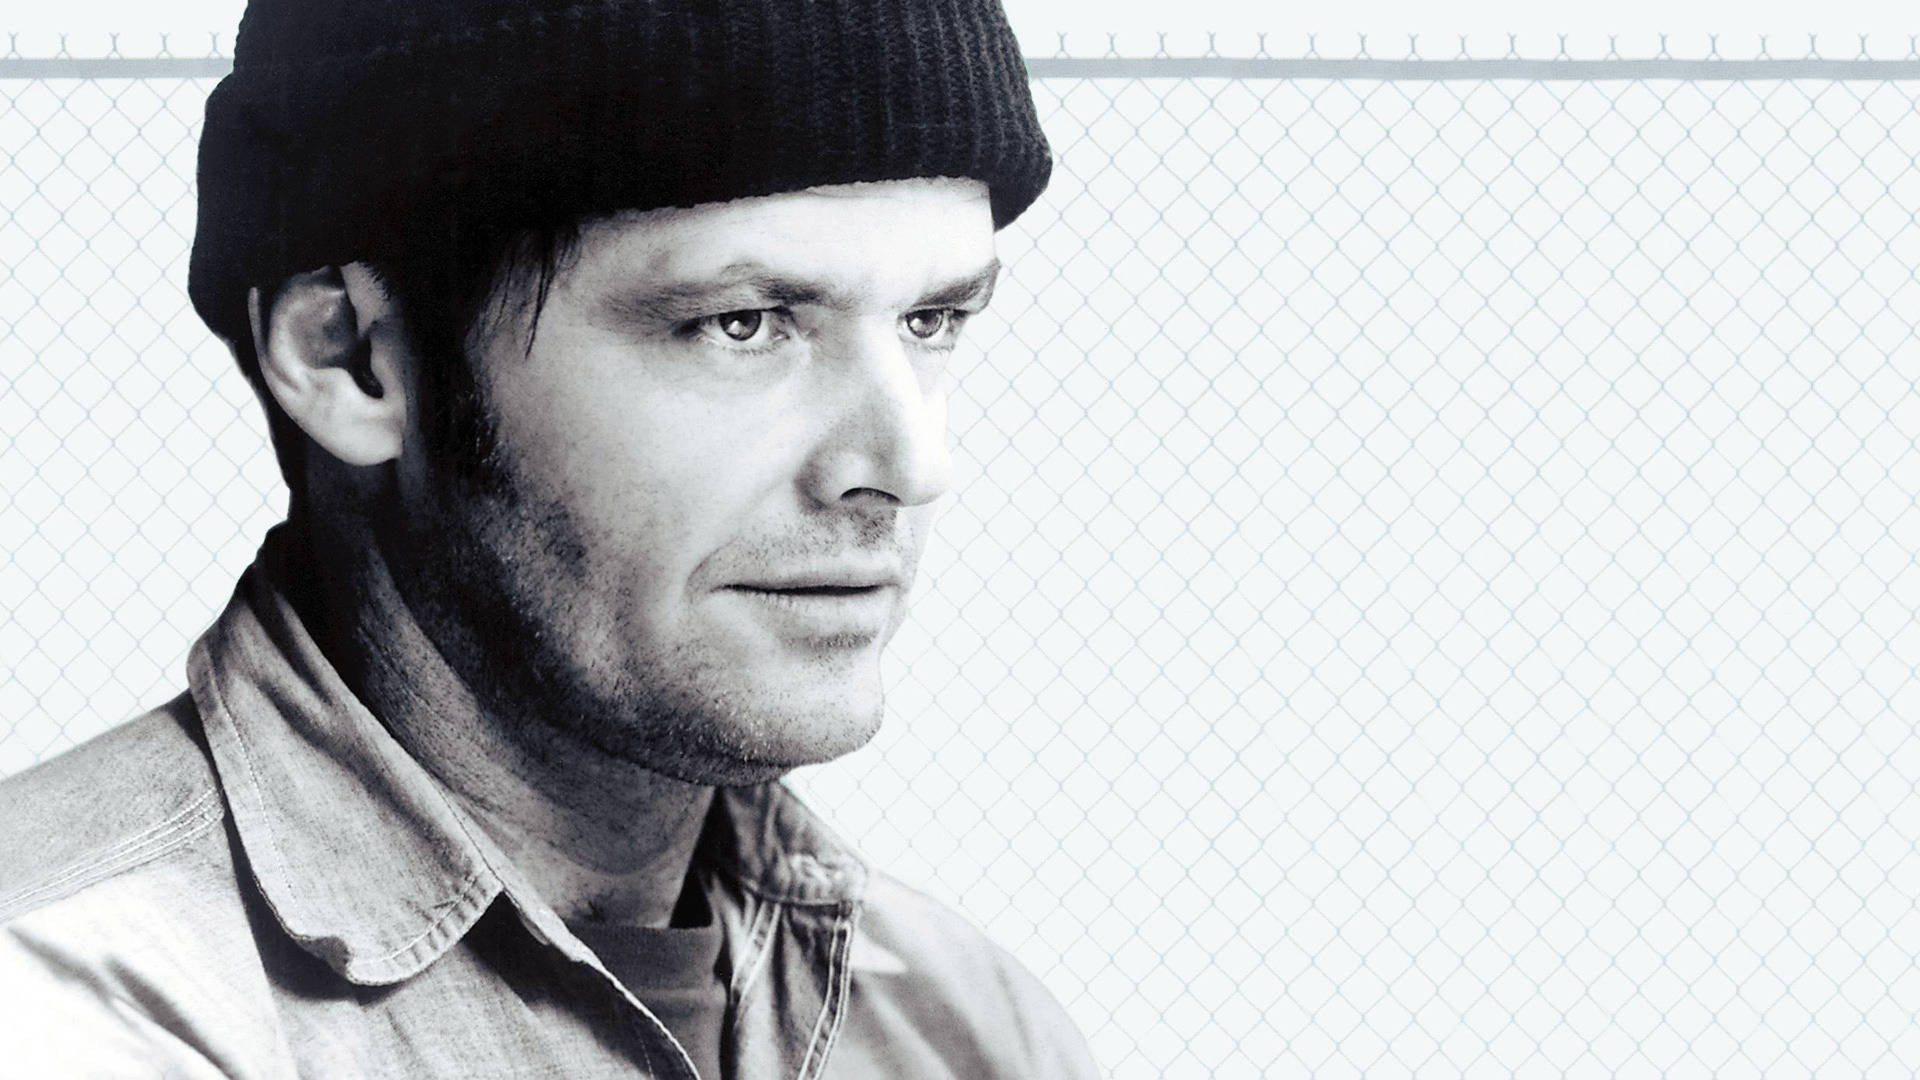 Jack Nicholson One Flew Over the Cuckoo's Nest 1975 Wallpaper